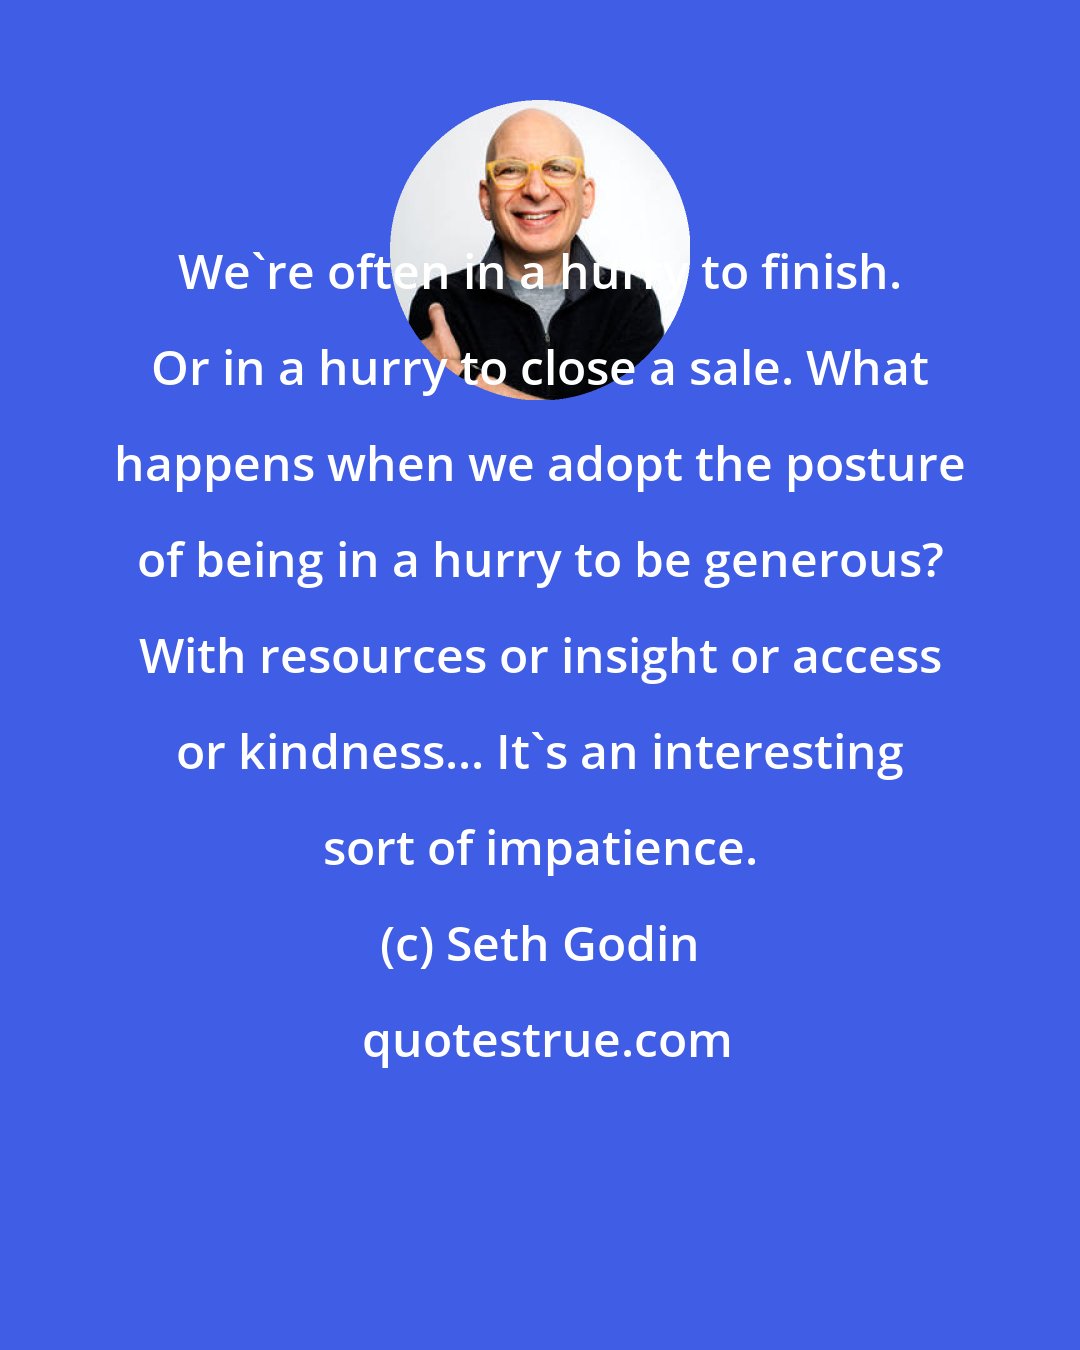 Seth Godin: We're often in a hurry to finish. Or in a hurry to close a sale. What happens when we adopt the posture of being in a hurry to be generous? With resources or insight or access or kindness... It's an interesting sort of impatience.